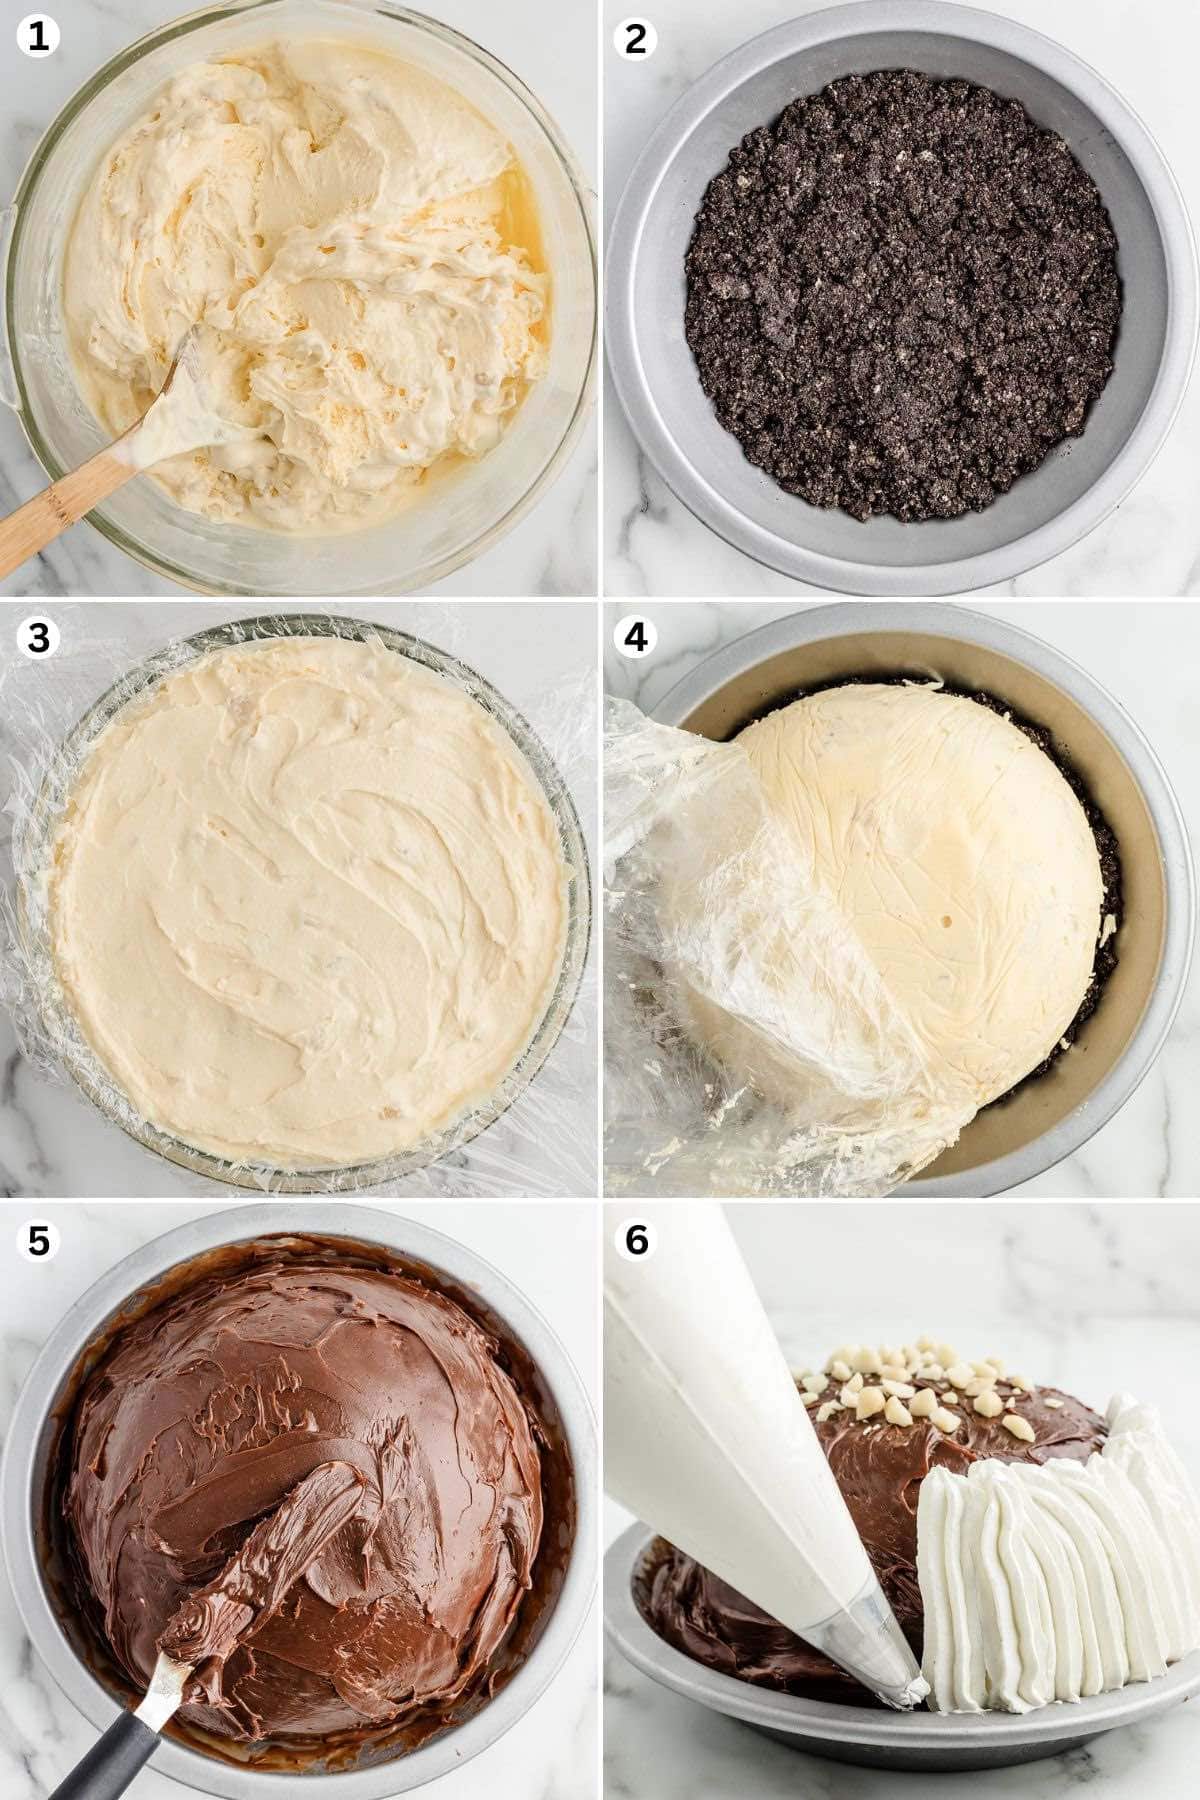 In a medium-sized mixing bowl, mix the vanilla ice cream. Press the buttered crumbs into the bottom of a pie plate. Line the inside of the mixing bowl with plastic wrap. Remove the plastic wrap over the top of the bowl. Drizzle the chocolate sauce over the mounded ice cream. Garnish the outer edge of the pie with the canned whipped topping and sprinkle the chopped macadamia nuts.